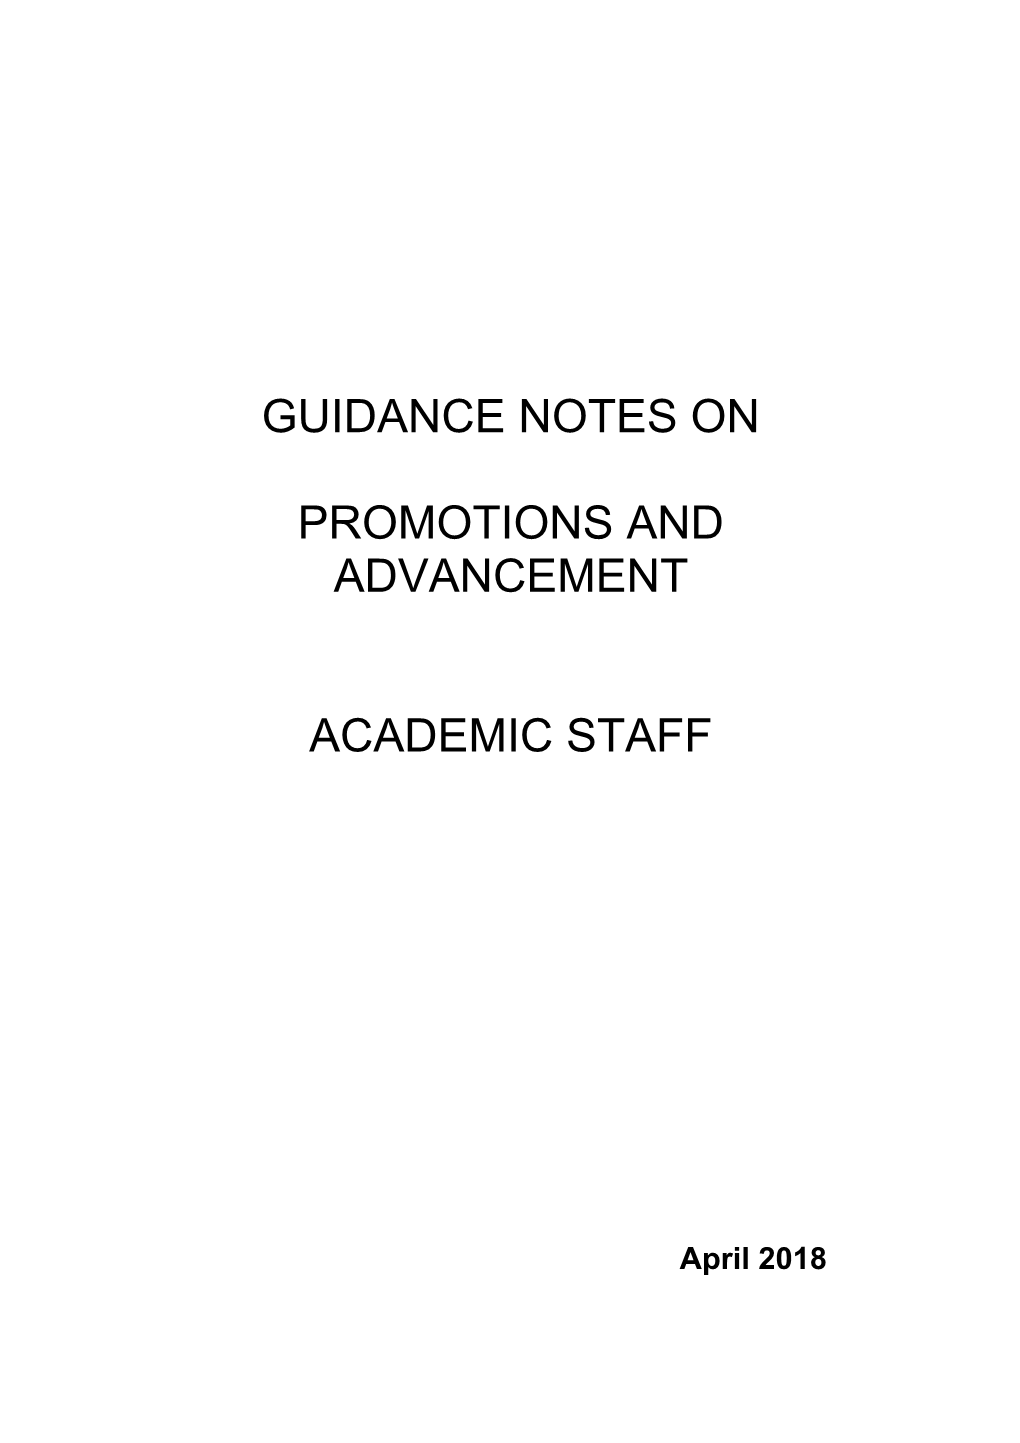 These Guidance Notes Should Be Read